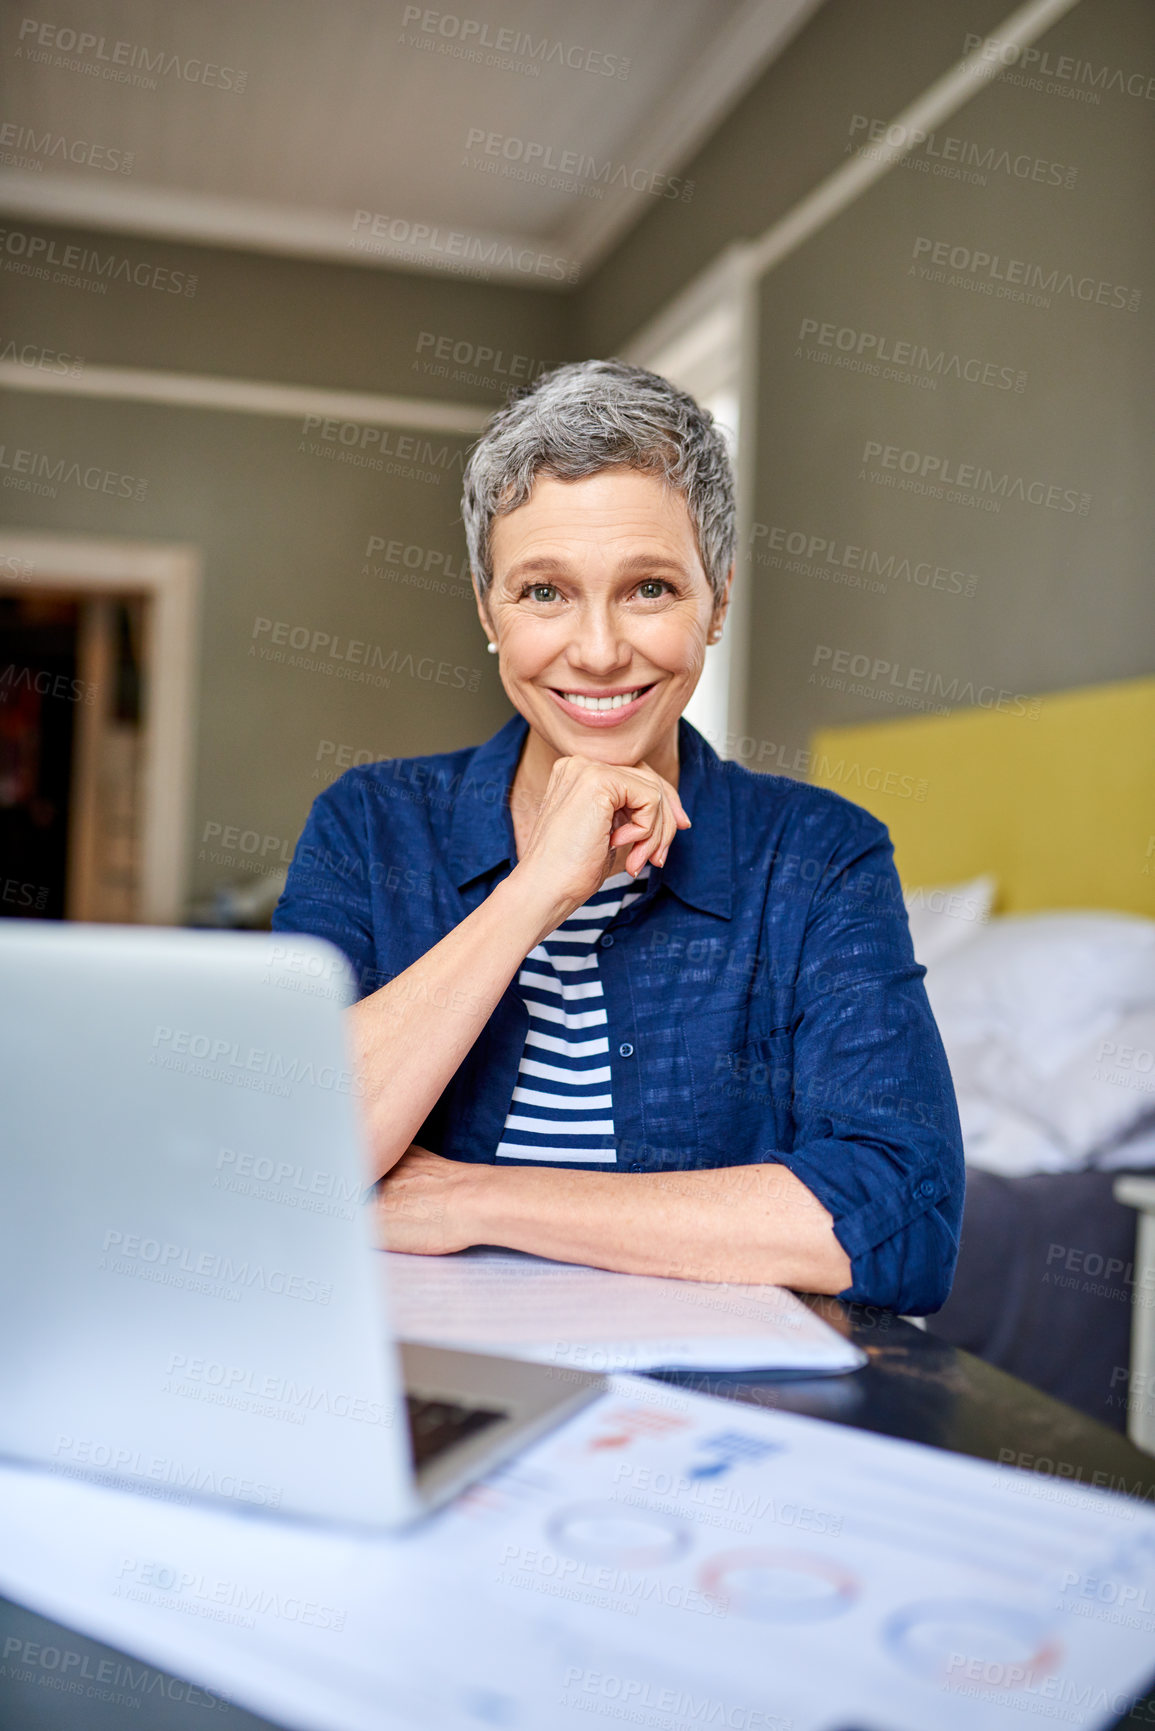 Buy stock photo Cropped portrait of a senior woman looking thoughtful while working on her finances at home